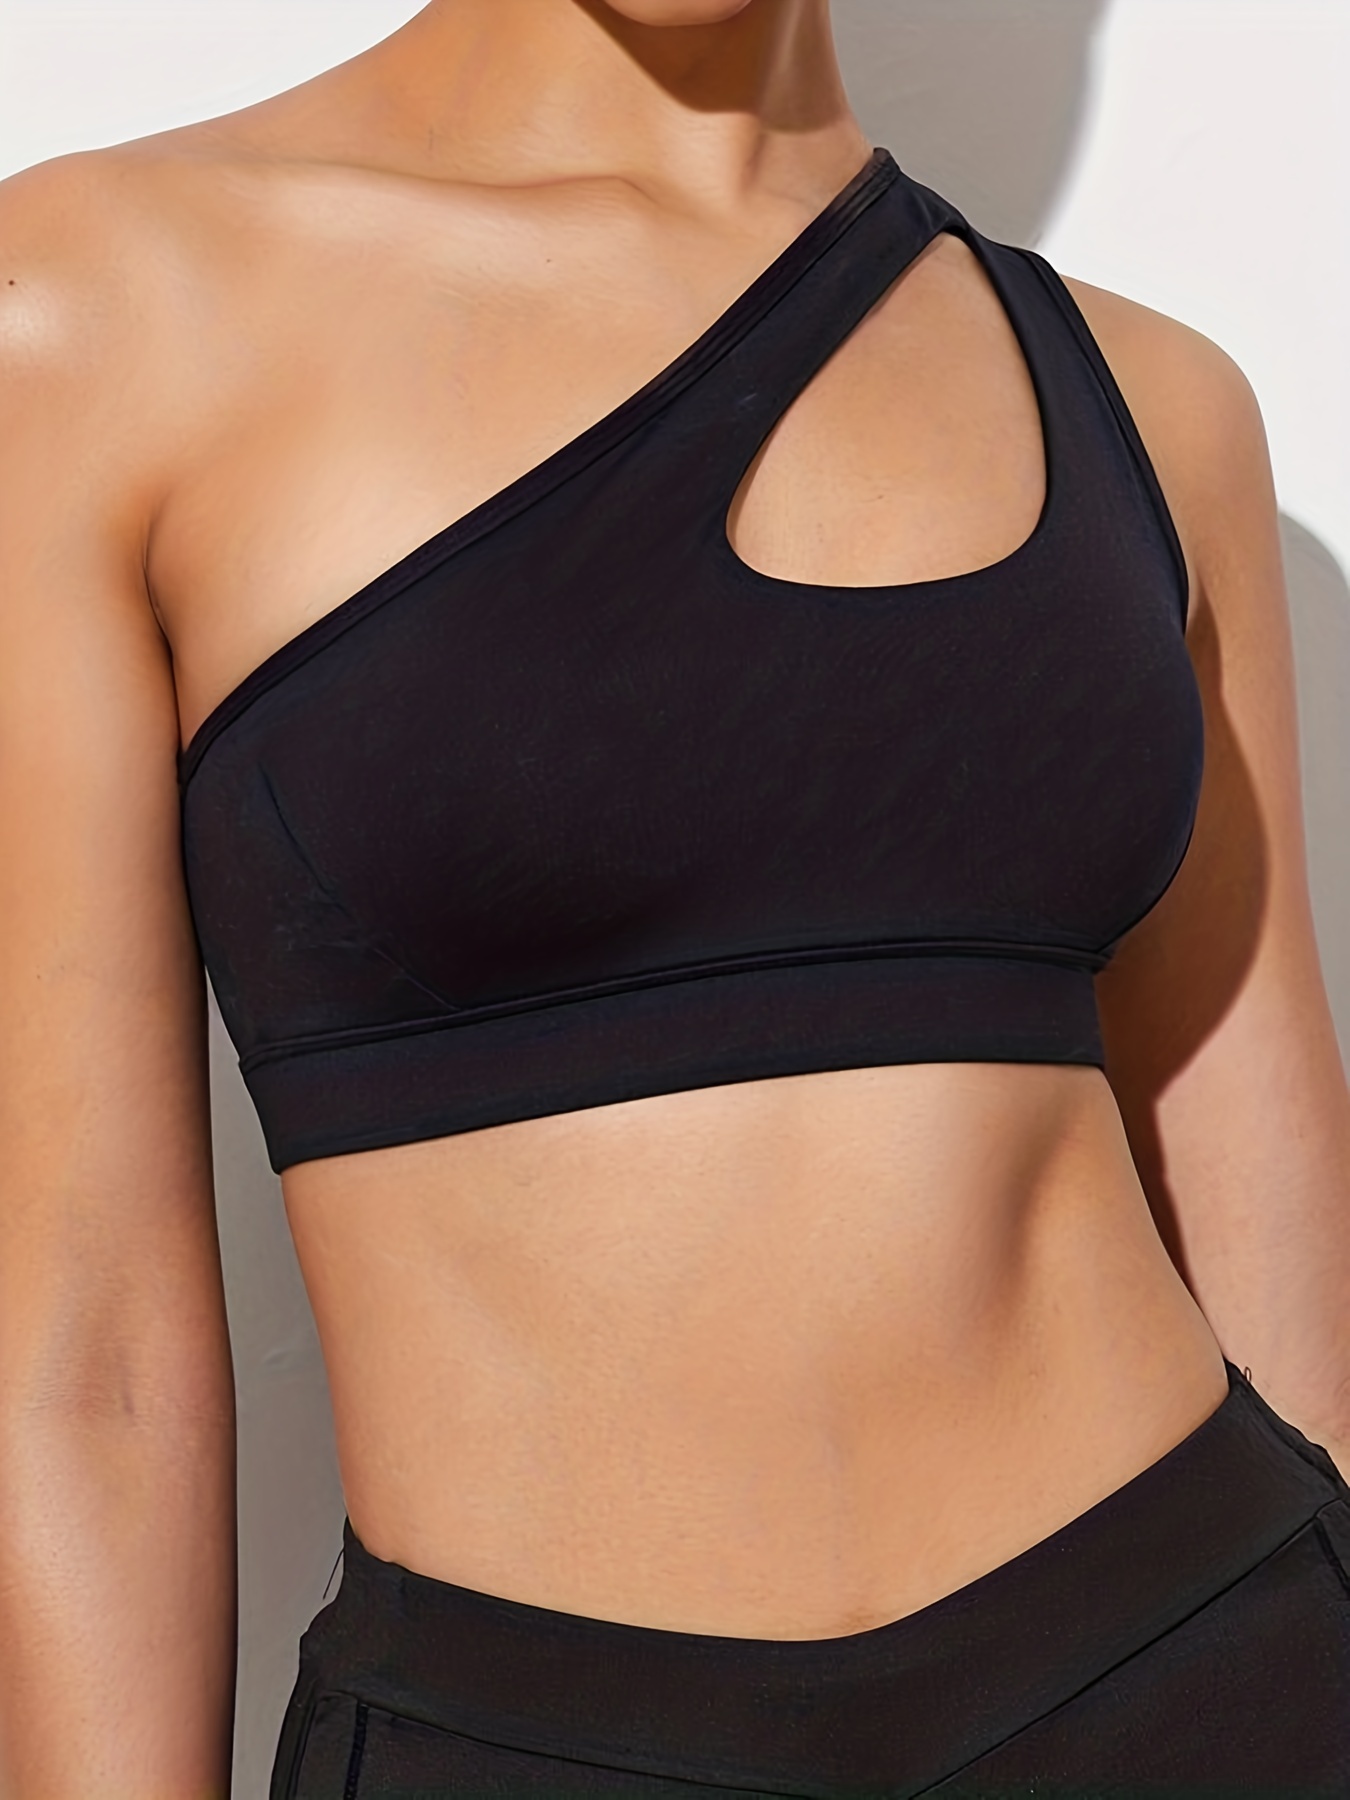 Is That The New Medium Support One Shoulder Sports Bra ??